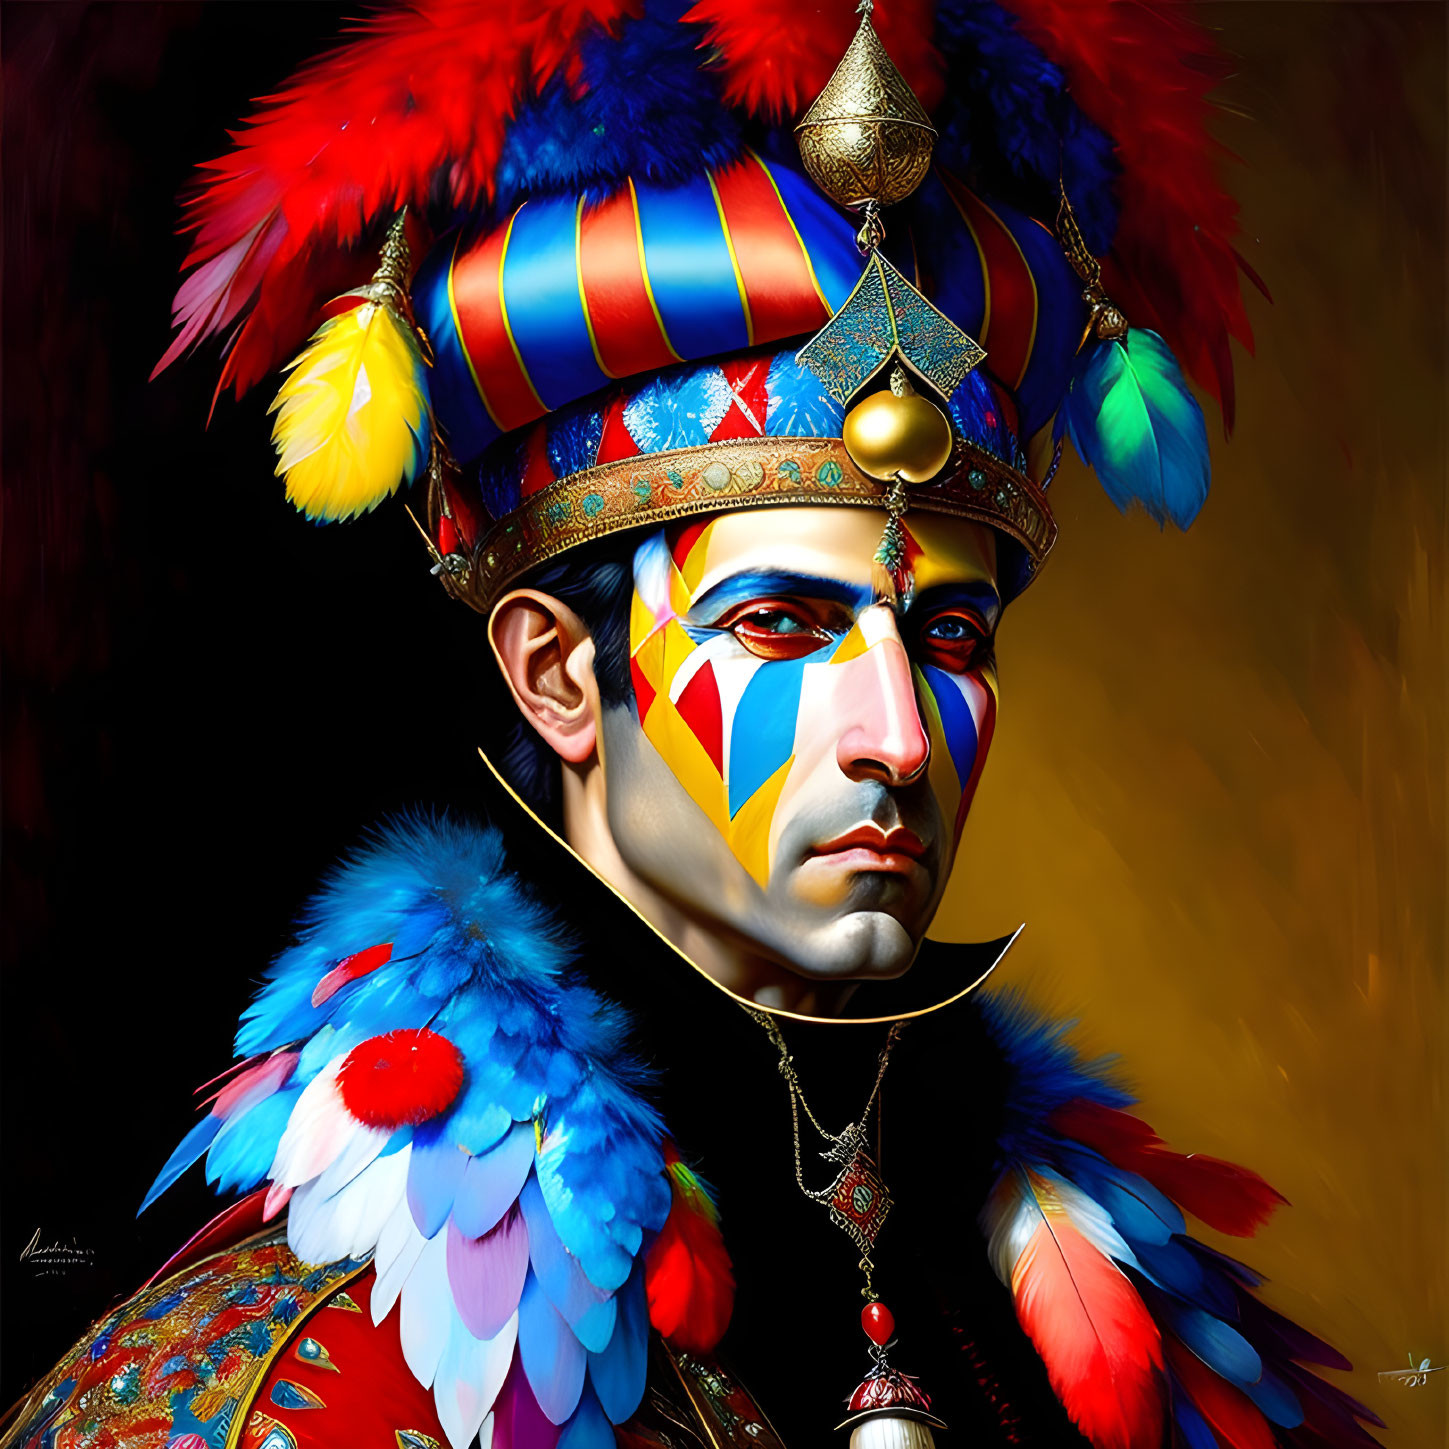 Colorful costume and theatrical face paint on a man.